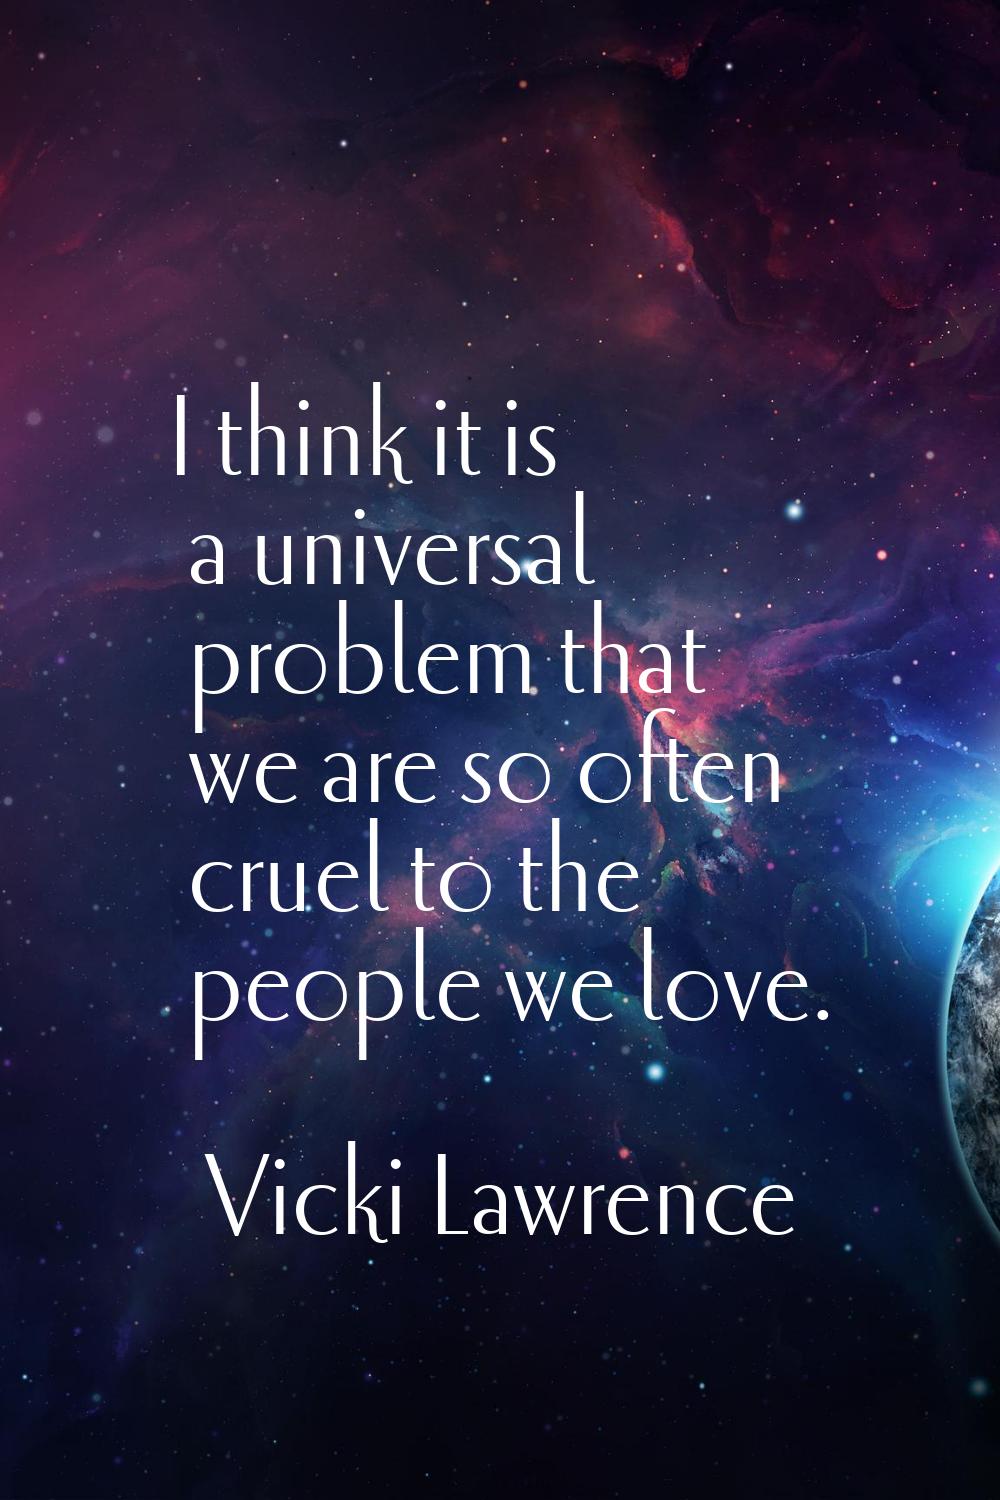 I think it is a universal problem that we are so often cruel to the people we love.